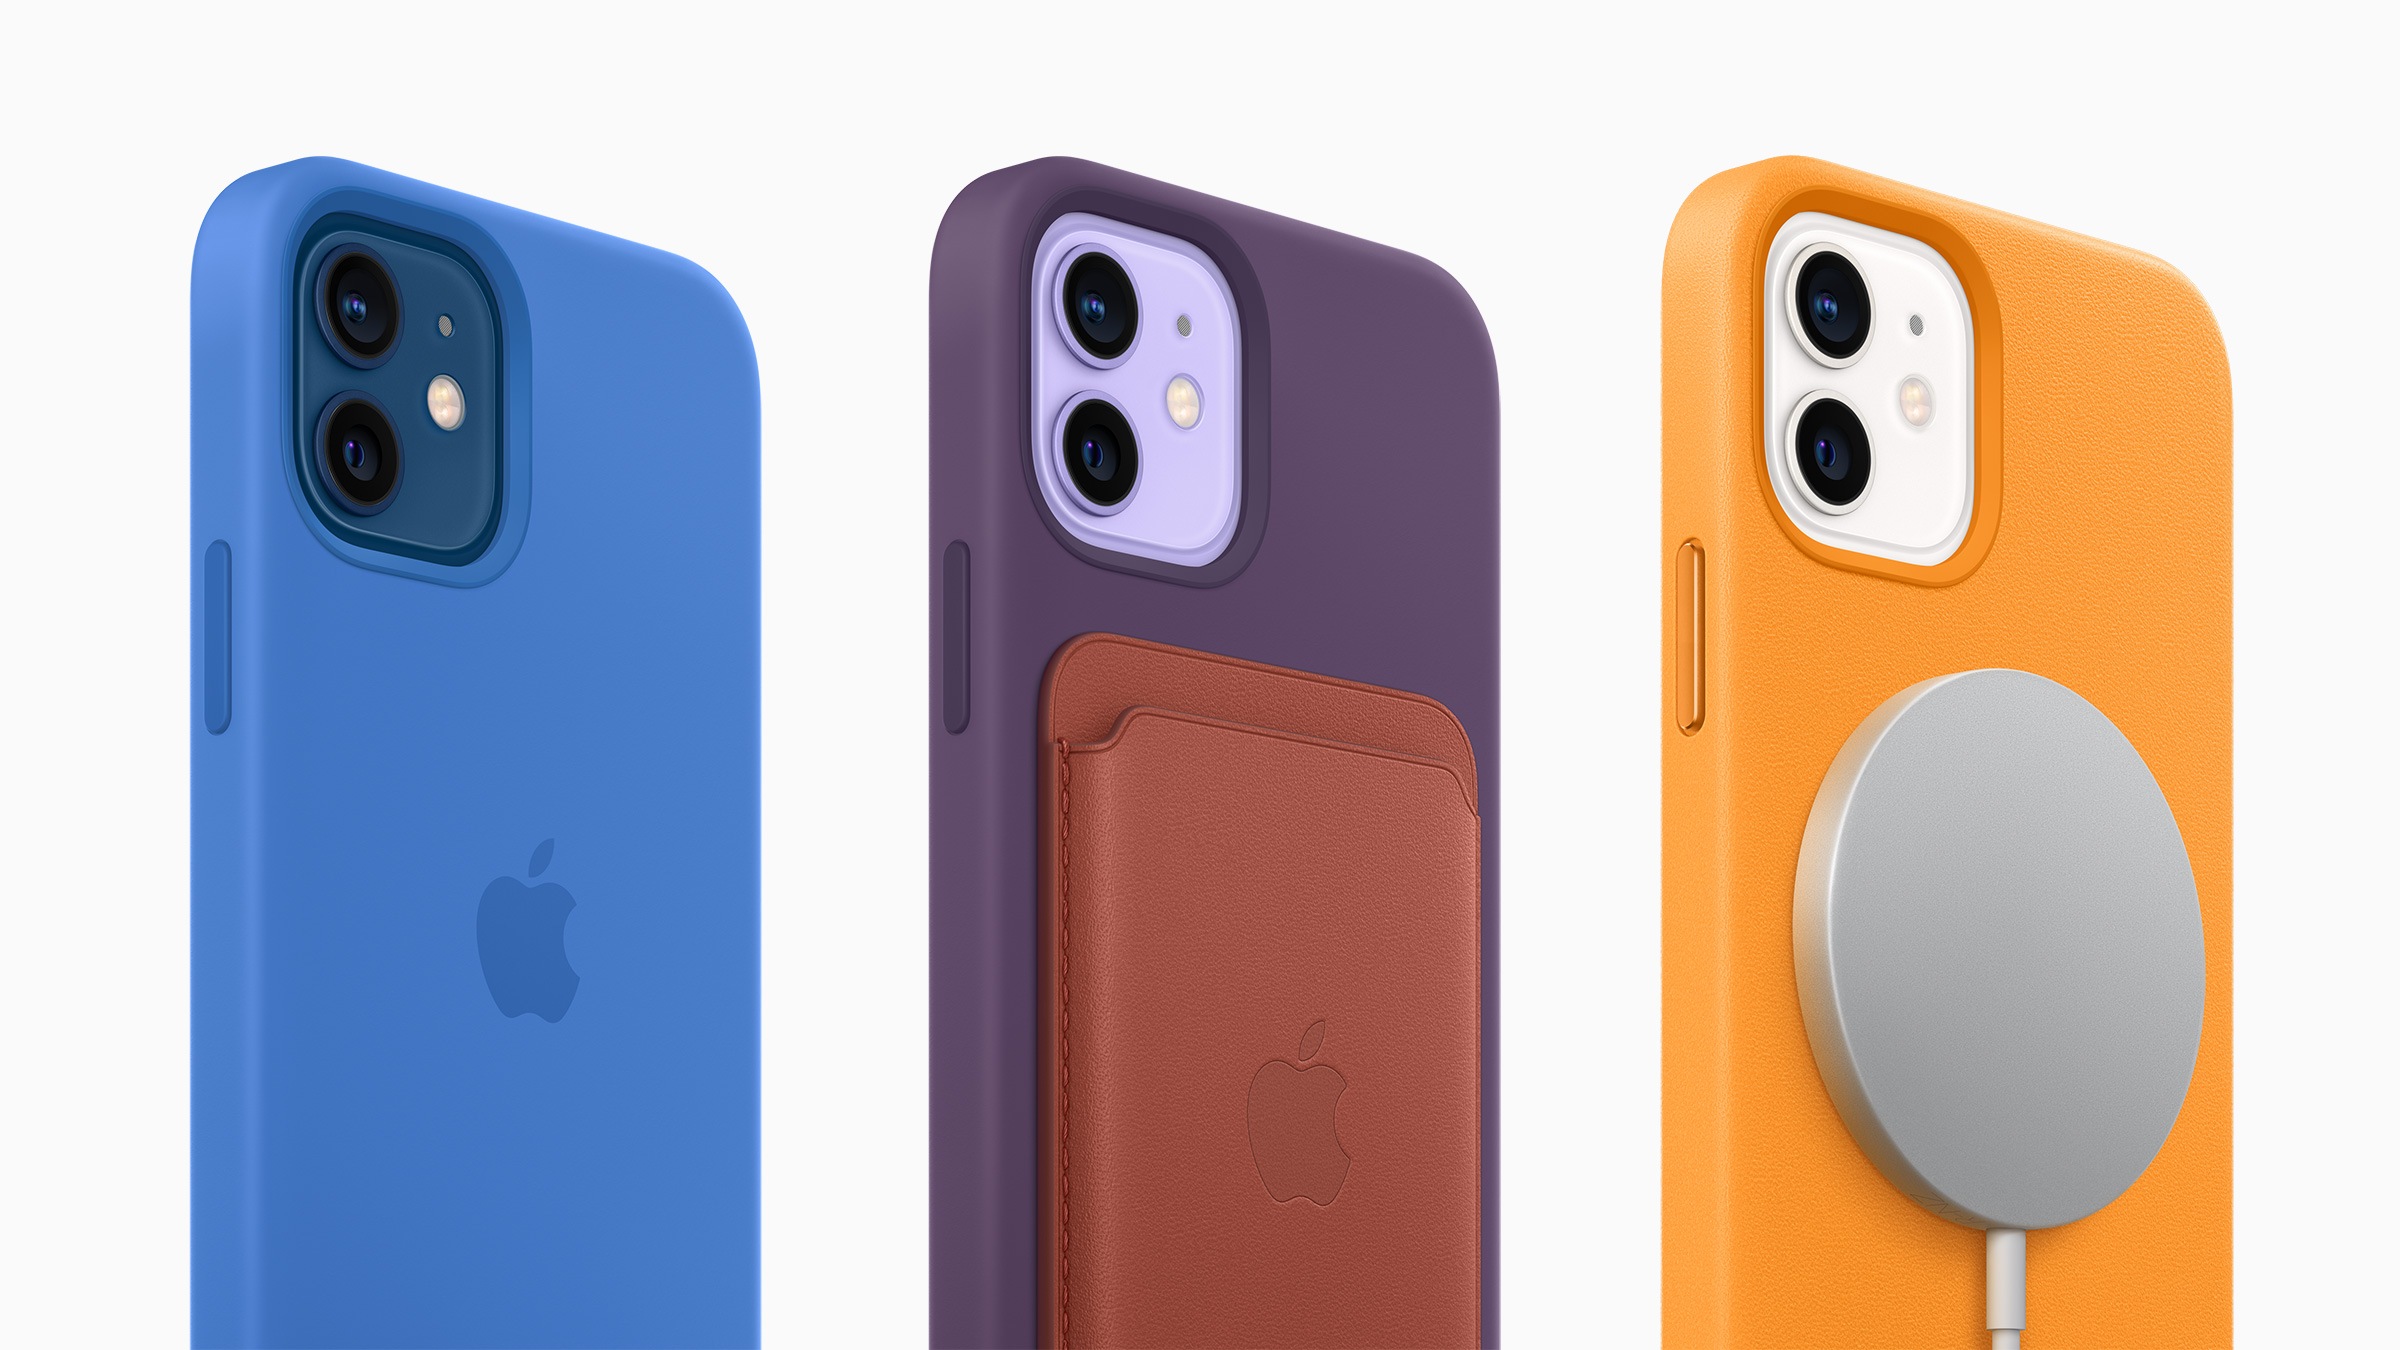 Apple Spring Loaded 21 New Purple Colour For Iphone 12 And 12 Mini Launched Price Remains Unchanged Ht Tech